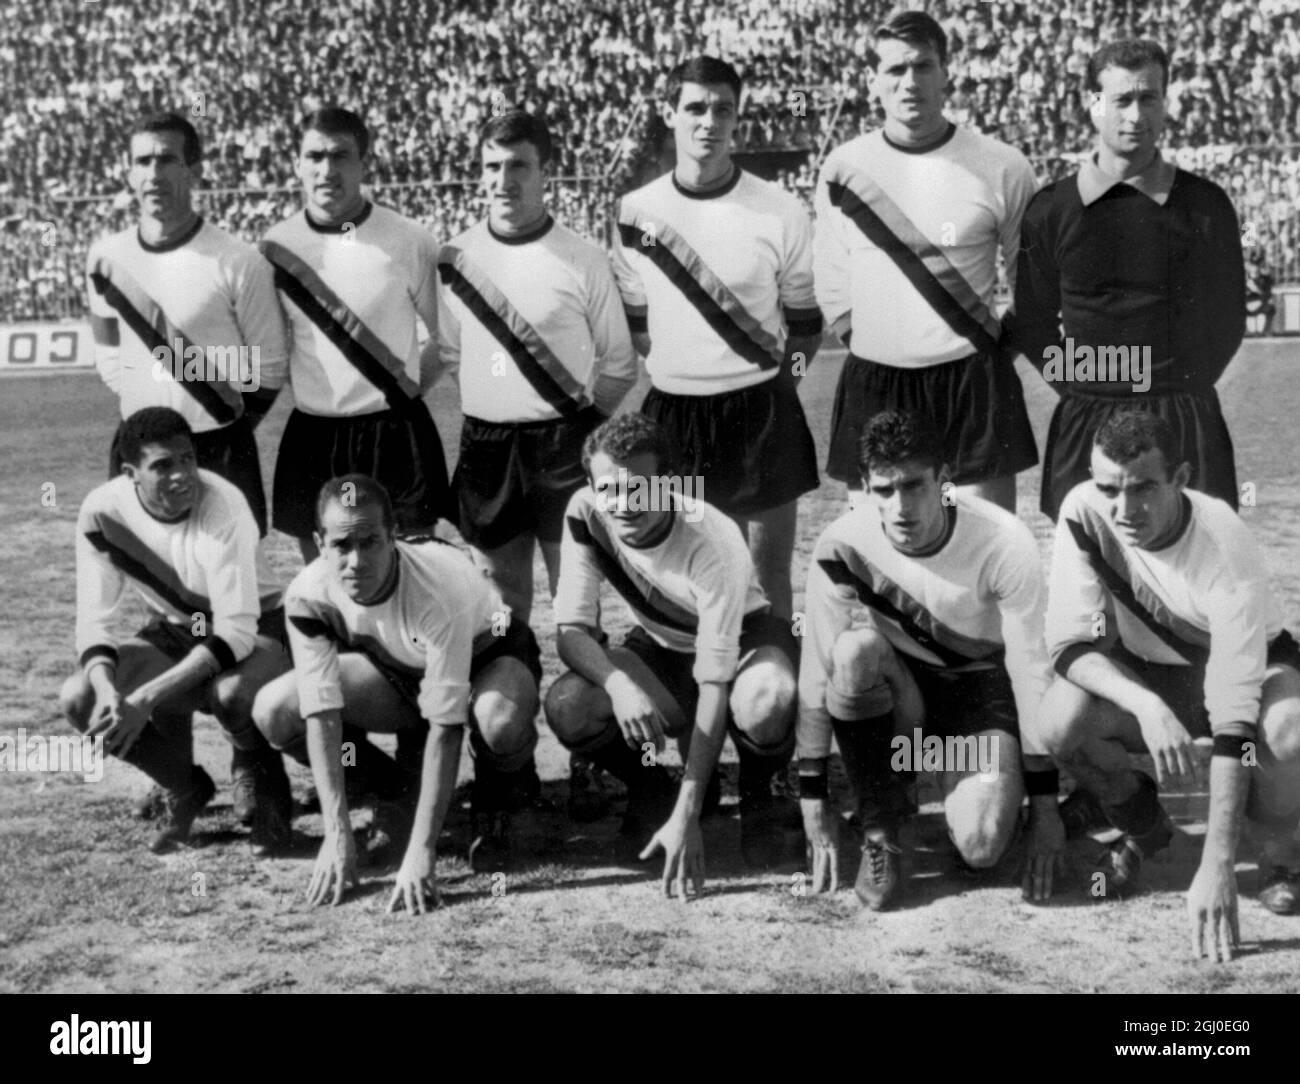 Members of the Inter Milan football team Standing from left: Sarti, Facchetti, Guarneri, Bedin, Burgnich and Picchi. Front Row from left: Corso, Bedin, Mazzola, Suarez and Jair. 14th June 1965. Stock Photo